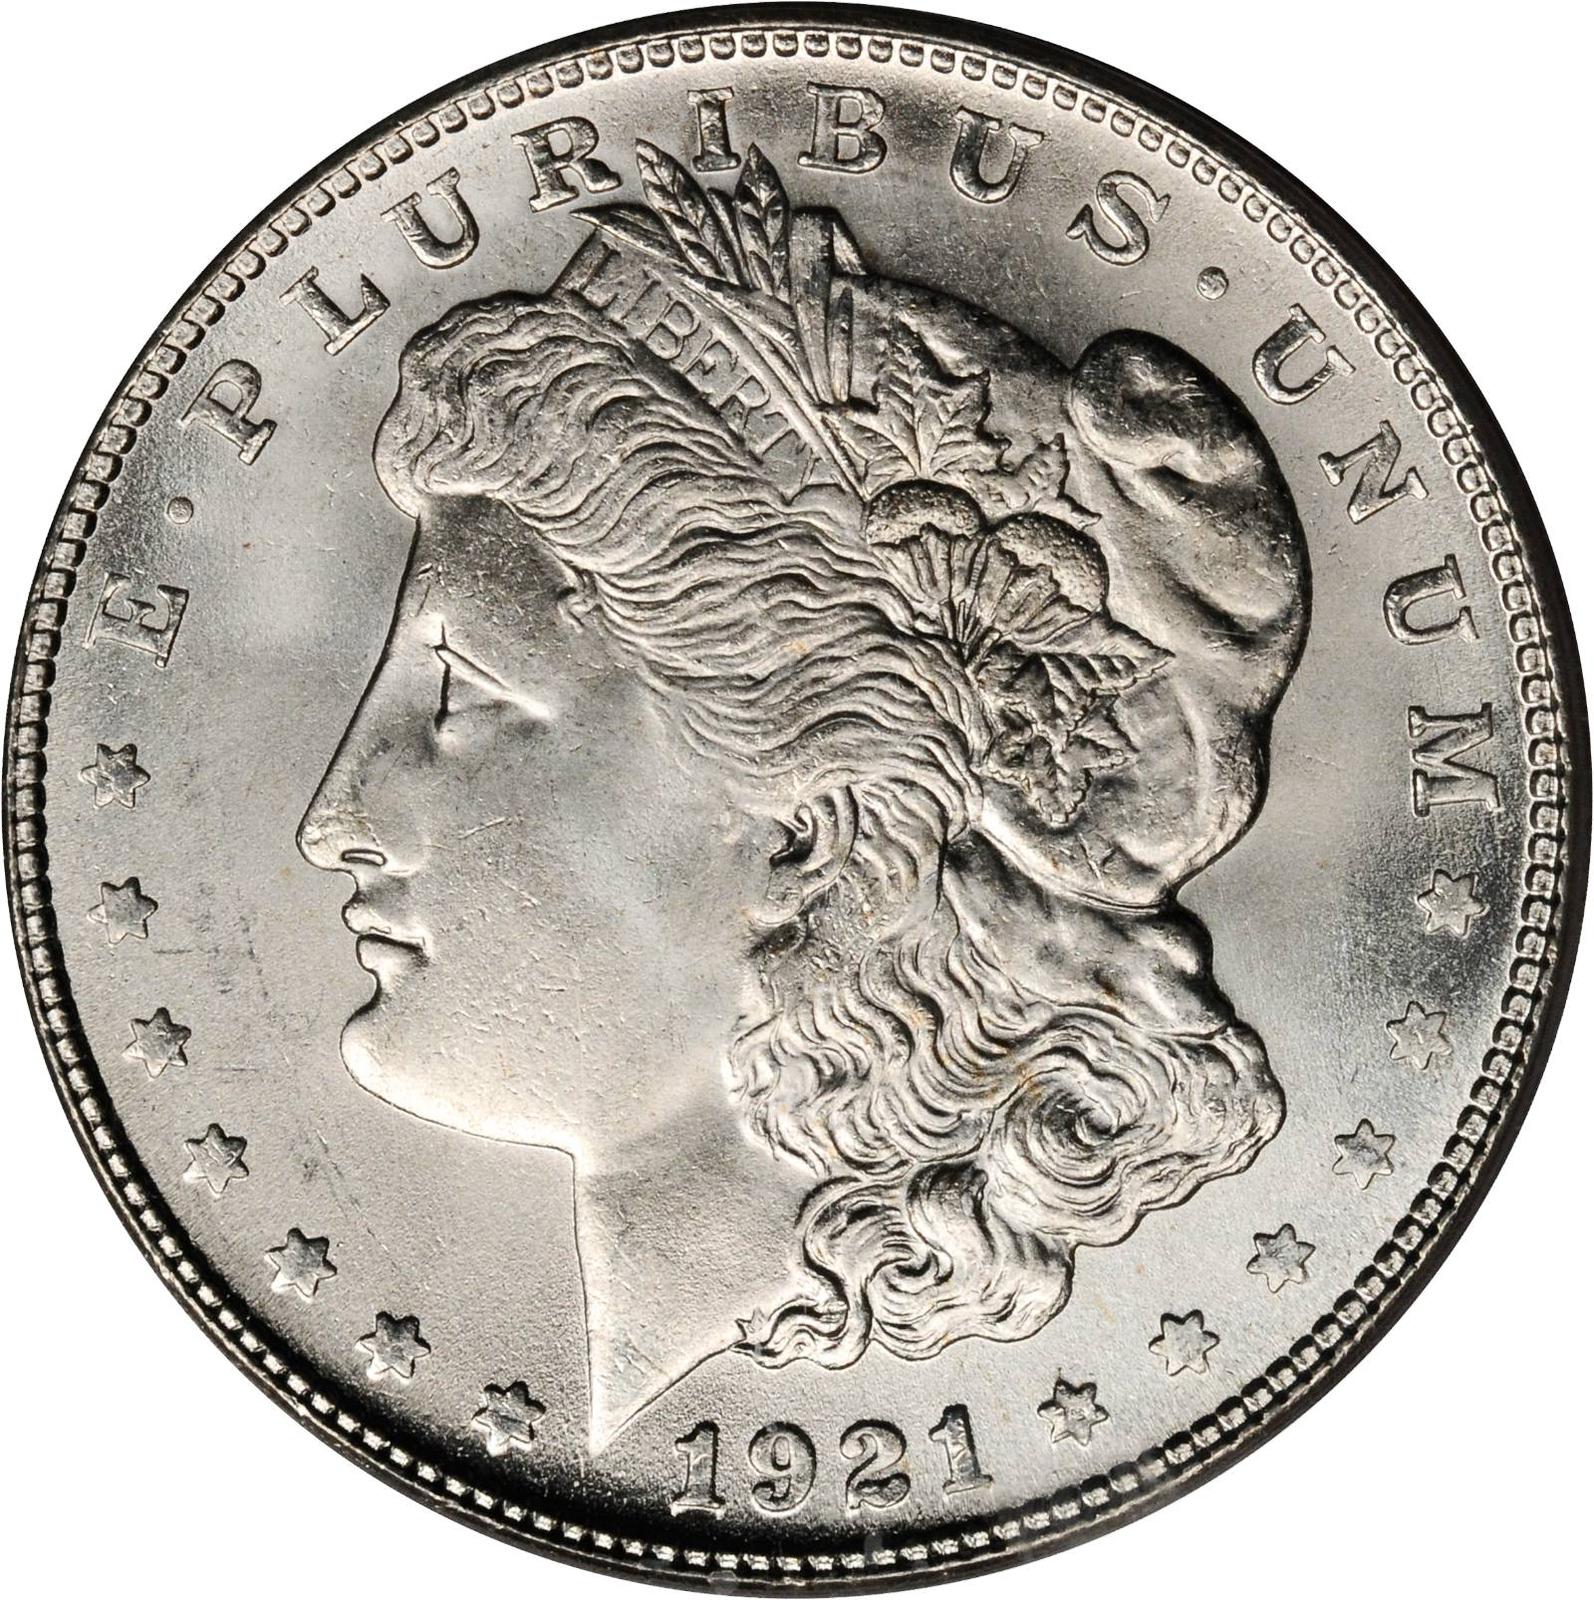 D $1 Morgan Silver Dollar (11th Struck, Engraved) NGC MS63 - Finest Known